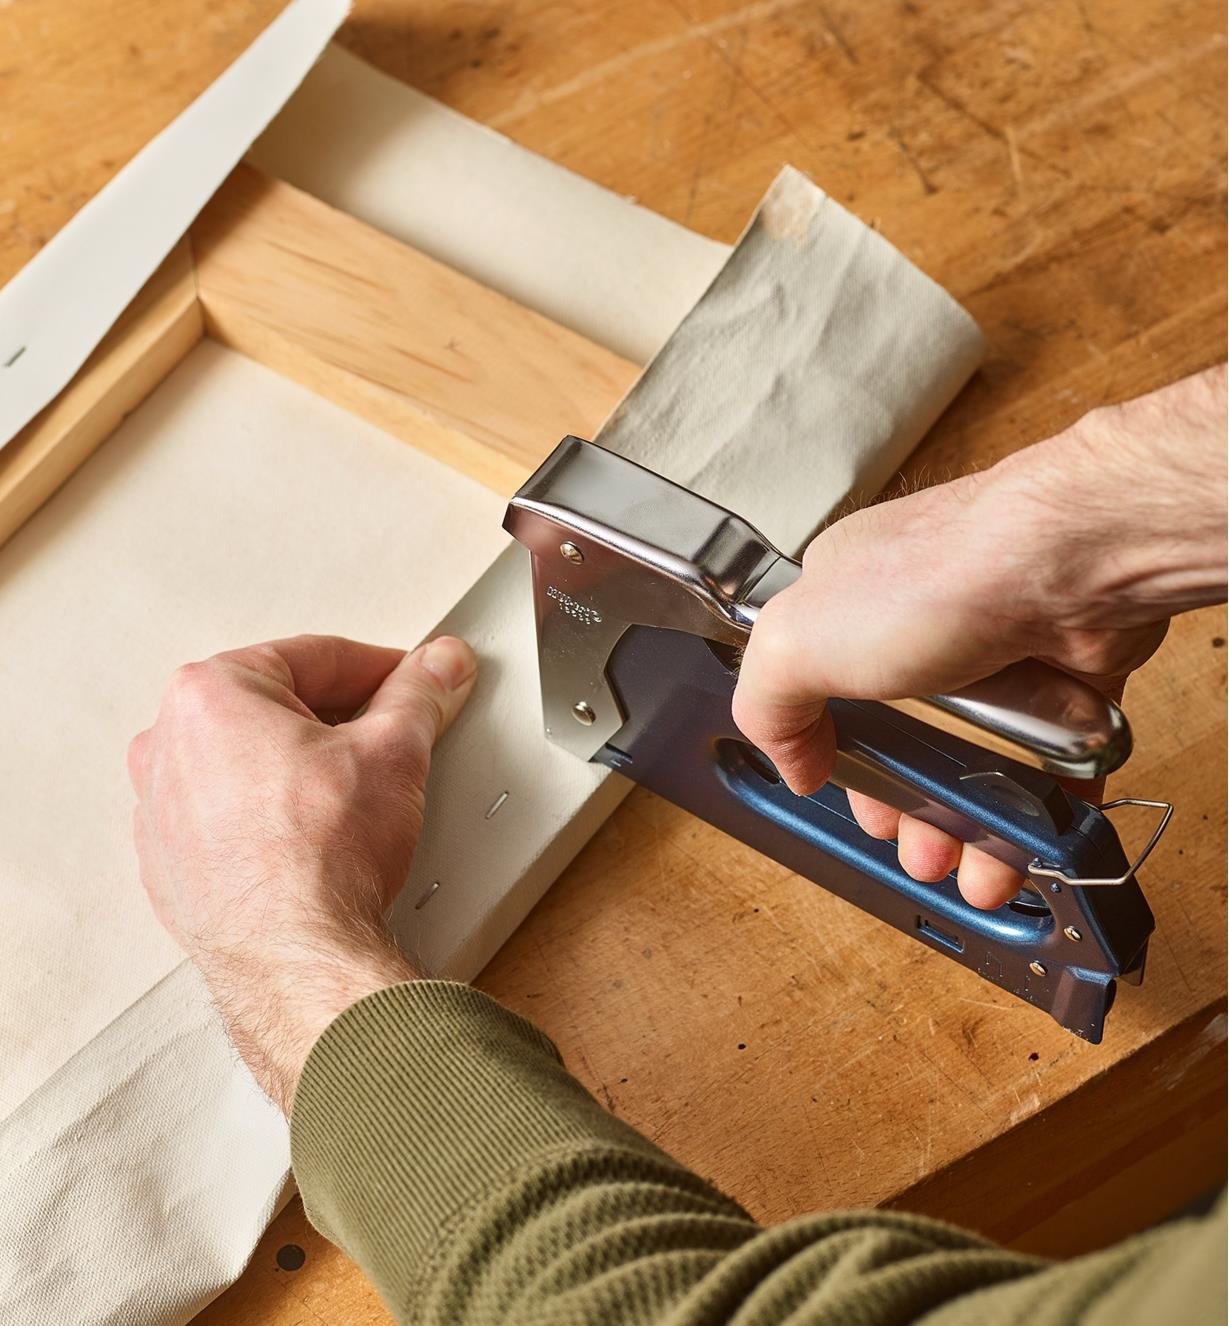 A staple gun being used to staple paper to a wooden frame